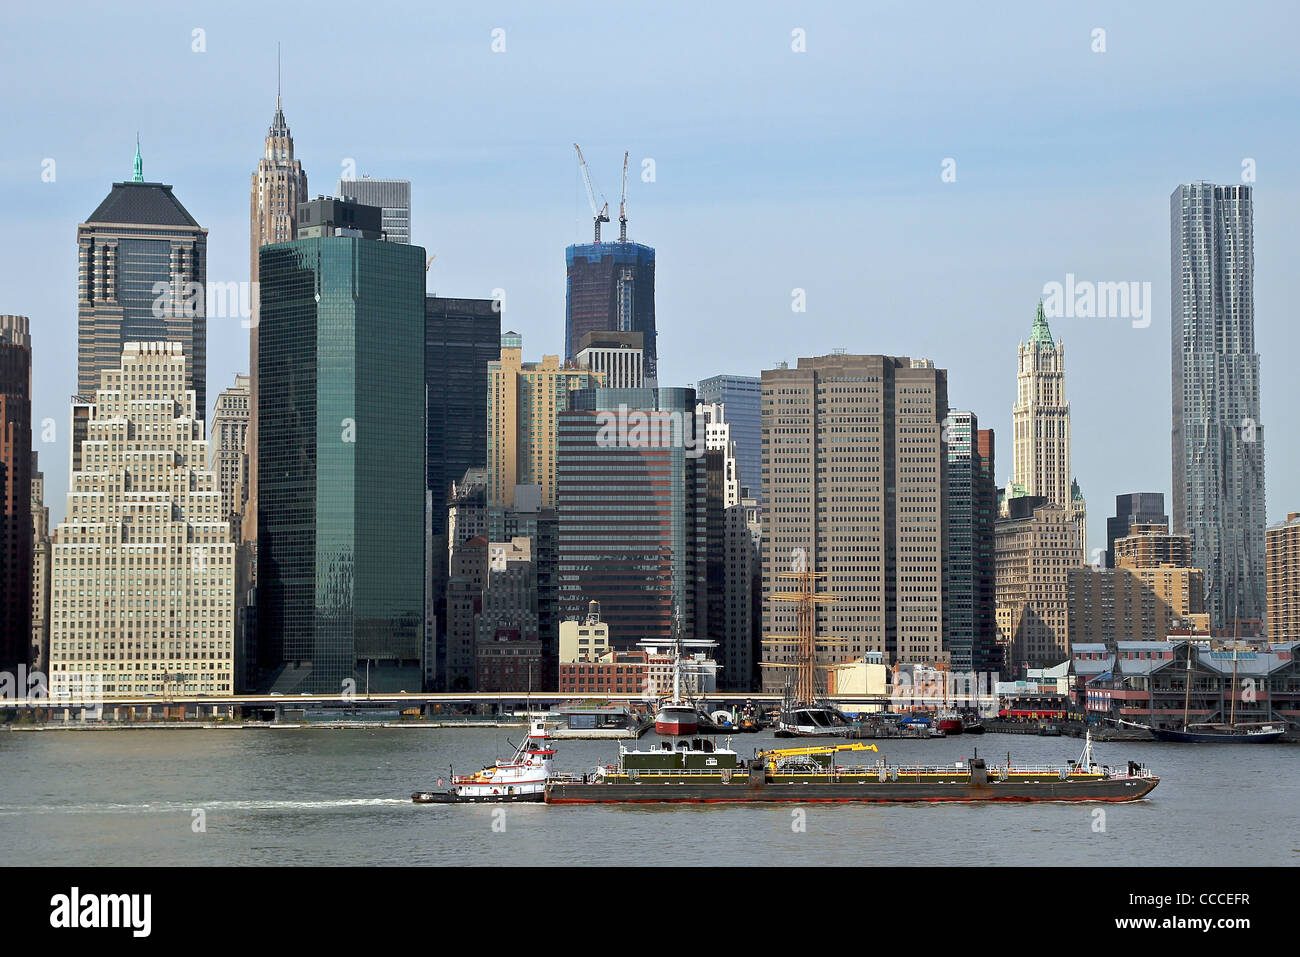 A view of Lower Manhattan and a barge in the East River. New York City, New York, United States Stock Photo